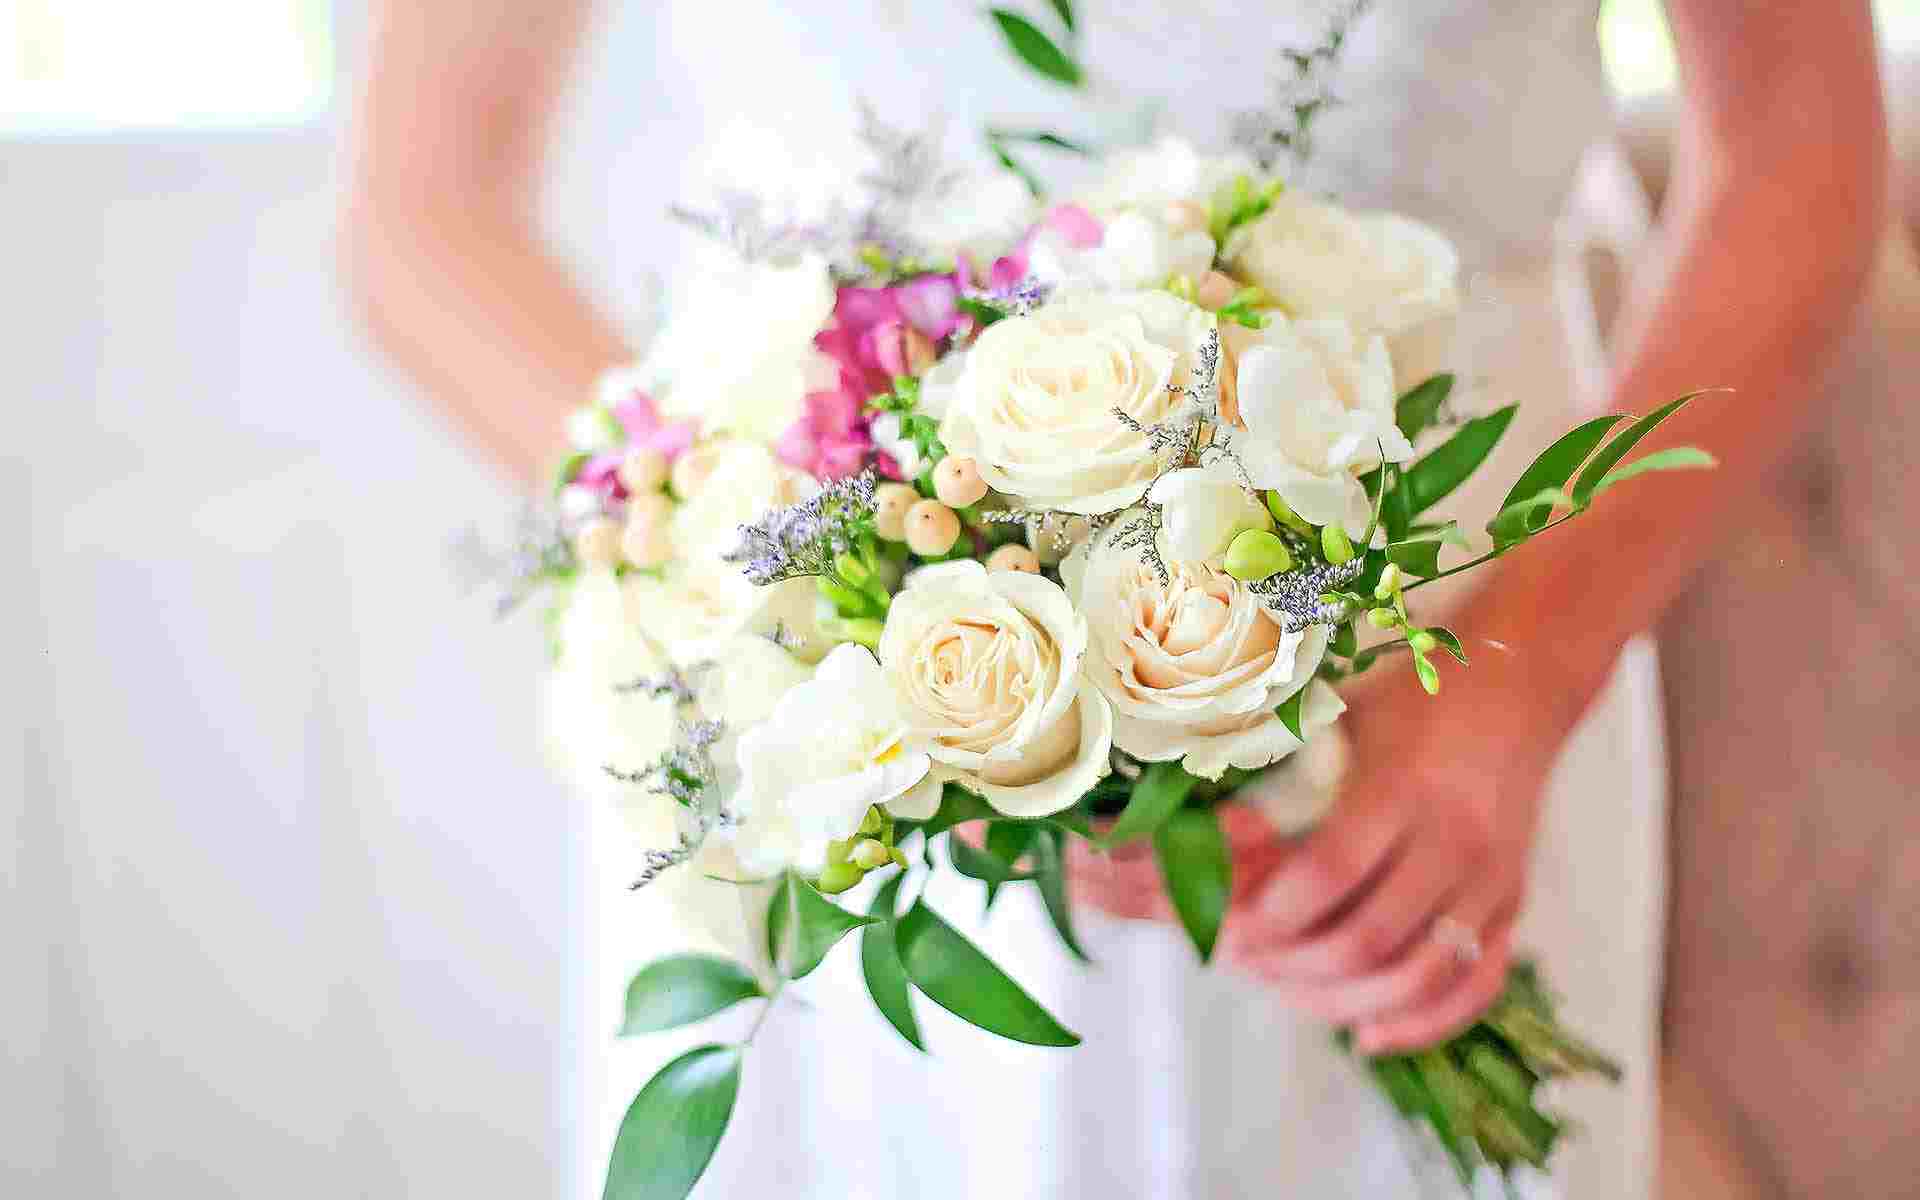 Beautiful-Wedding-Bouquet-To-Get-Inspired-For-Your-Own-Big-Day